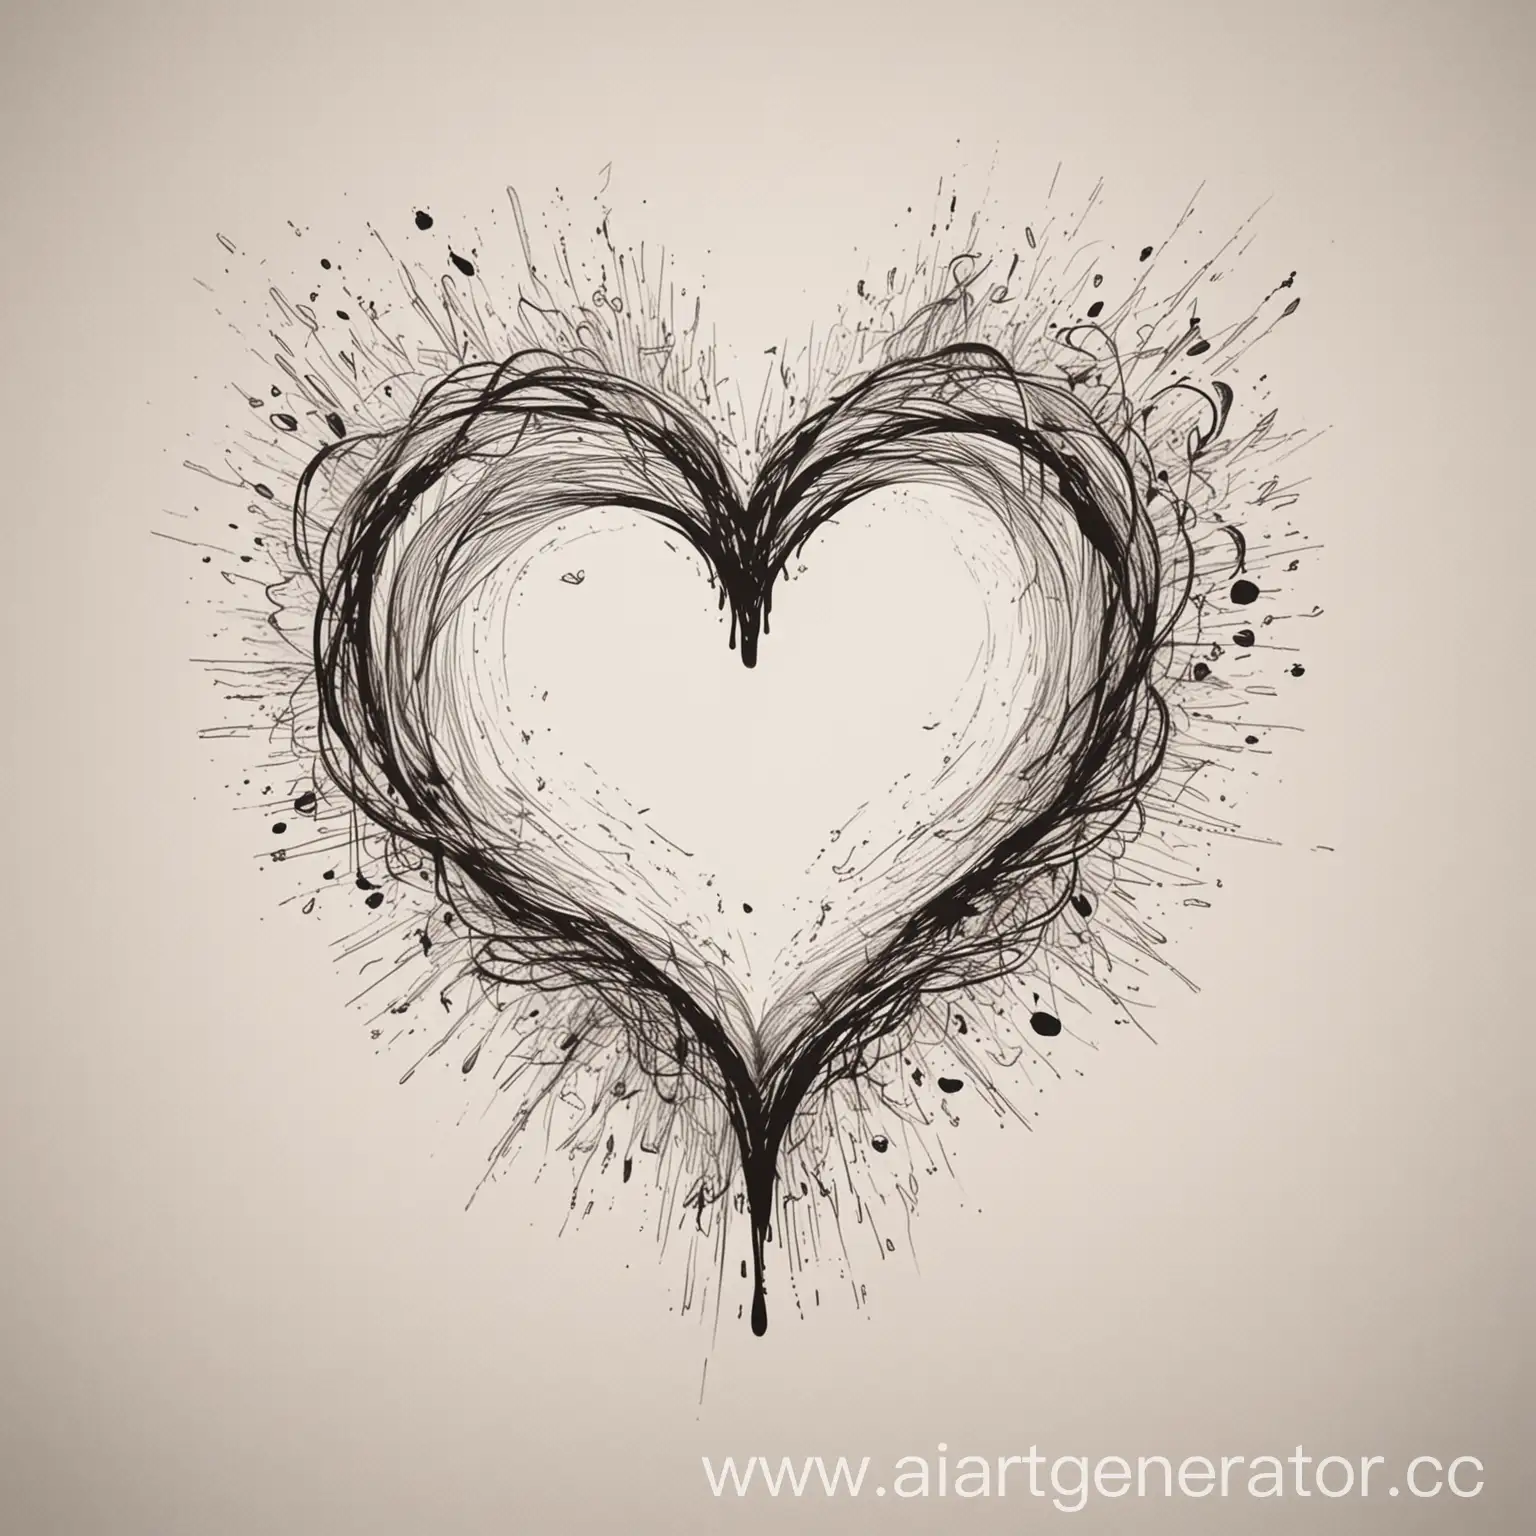 Create a minimalist line art illustration on a white background, resembling pen sketches. The artwork should depict two contrasting scenes side by side. On the left side, illustrate flames or fiery lines erupting spontaneously to symbolize hate or anger. The lines should be sharp and jagged, conveying a sense of intensity. On the right side, depict delicate, flowing lines forming a heart or abstract shapes to represent the awakening of love. The lines here should be gentle and smooth, suggesting a calm and gradual emergence. The overall composition should highlight the swift ignition of hate versus the slower awakening of love, using clean and expressive lines.

